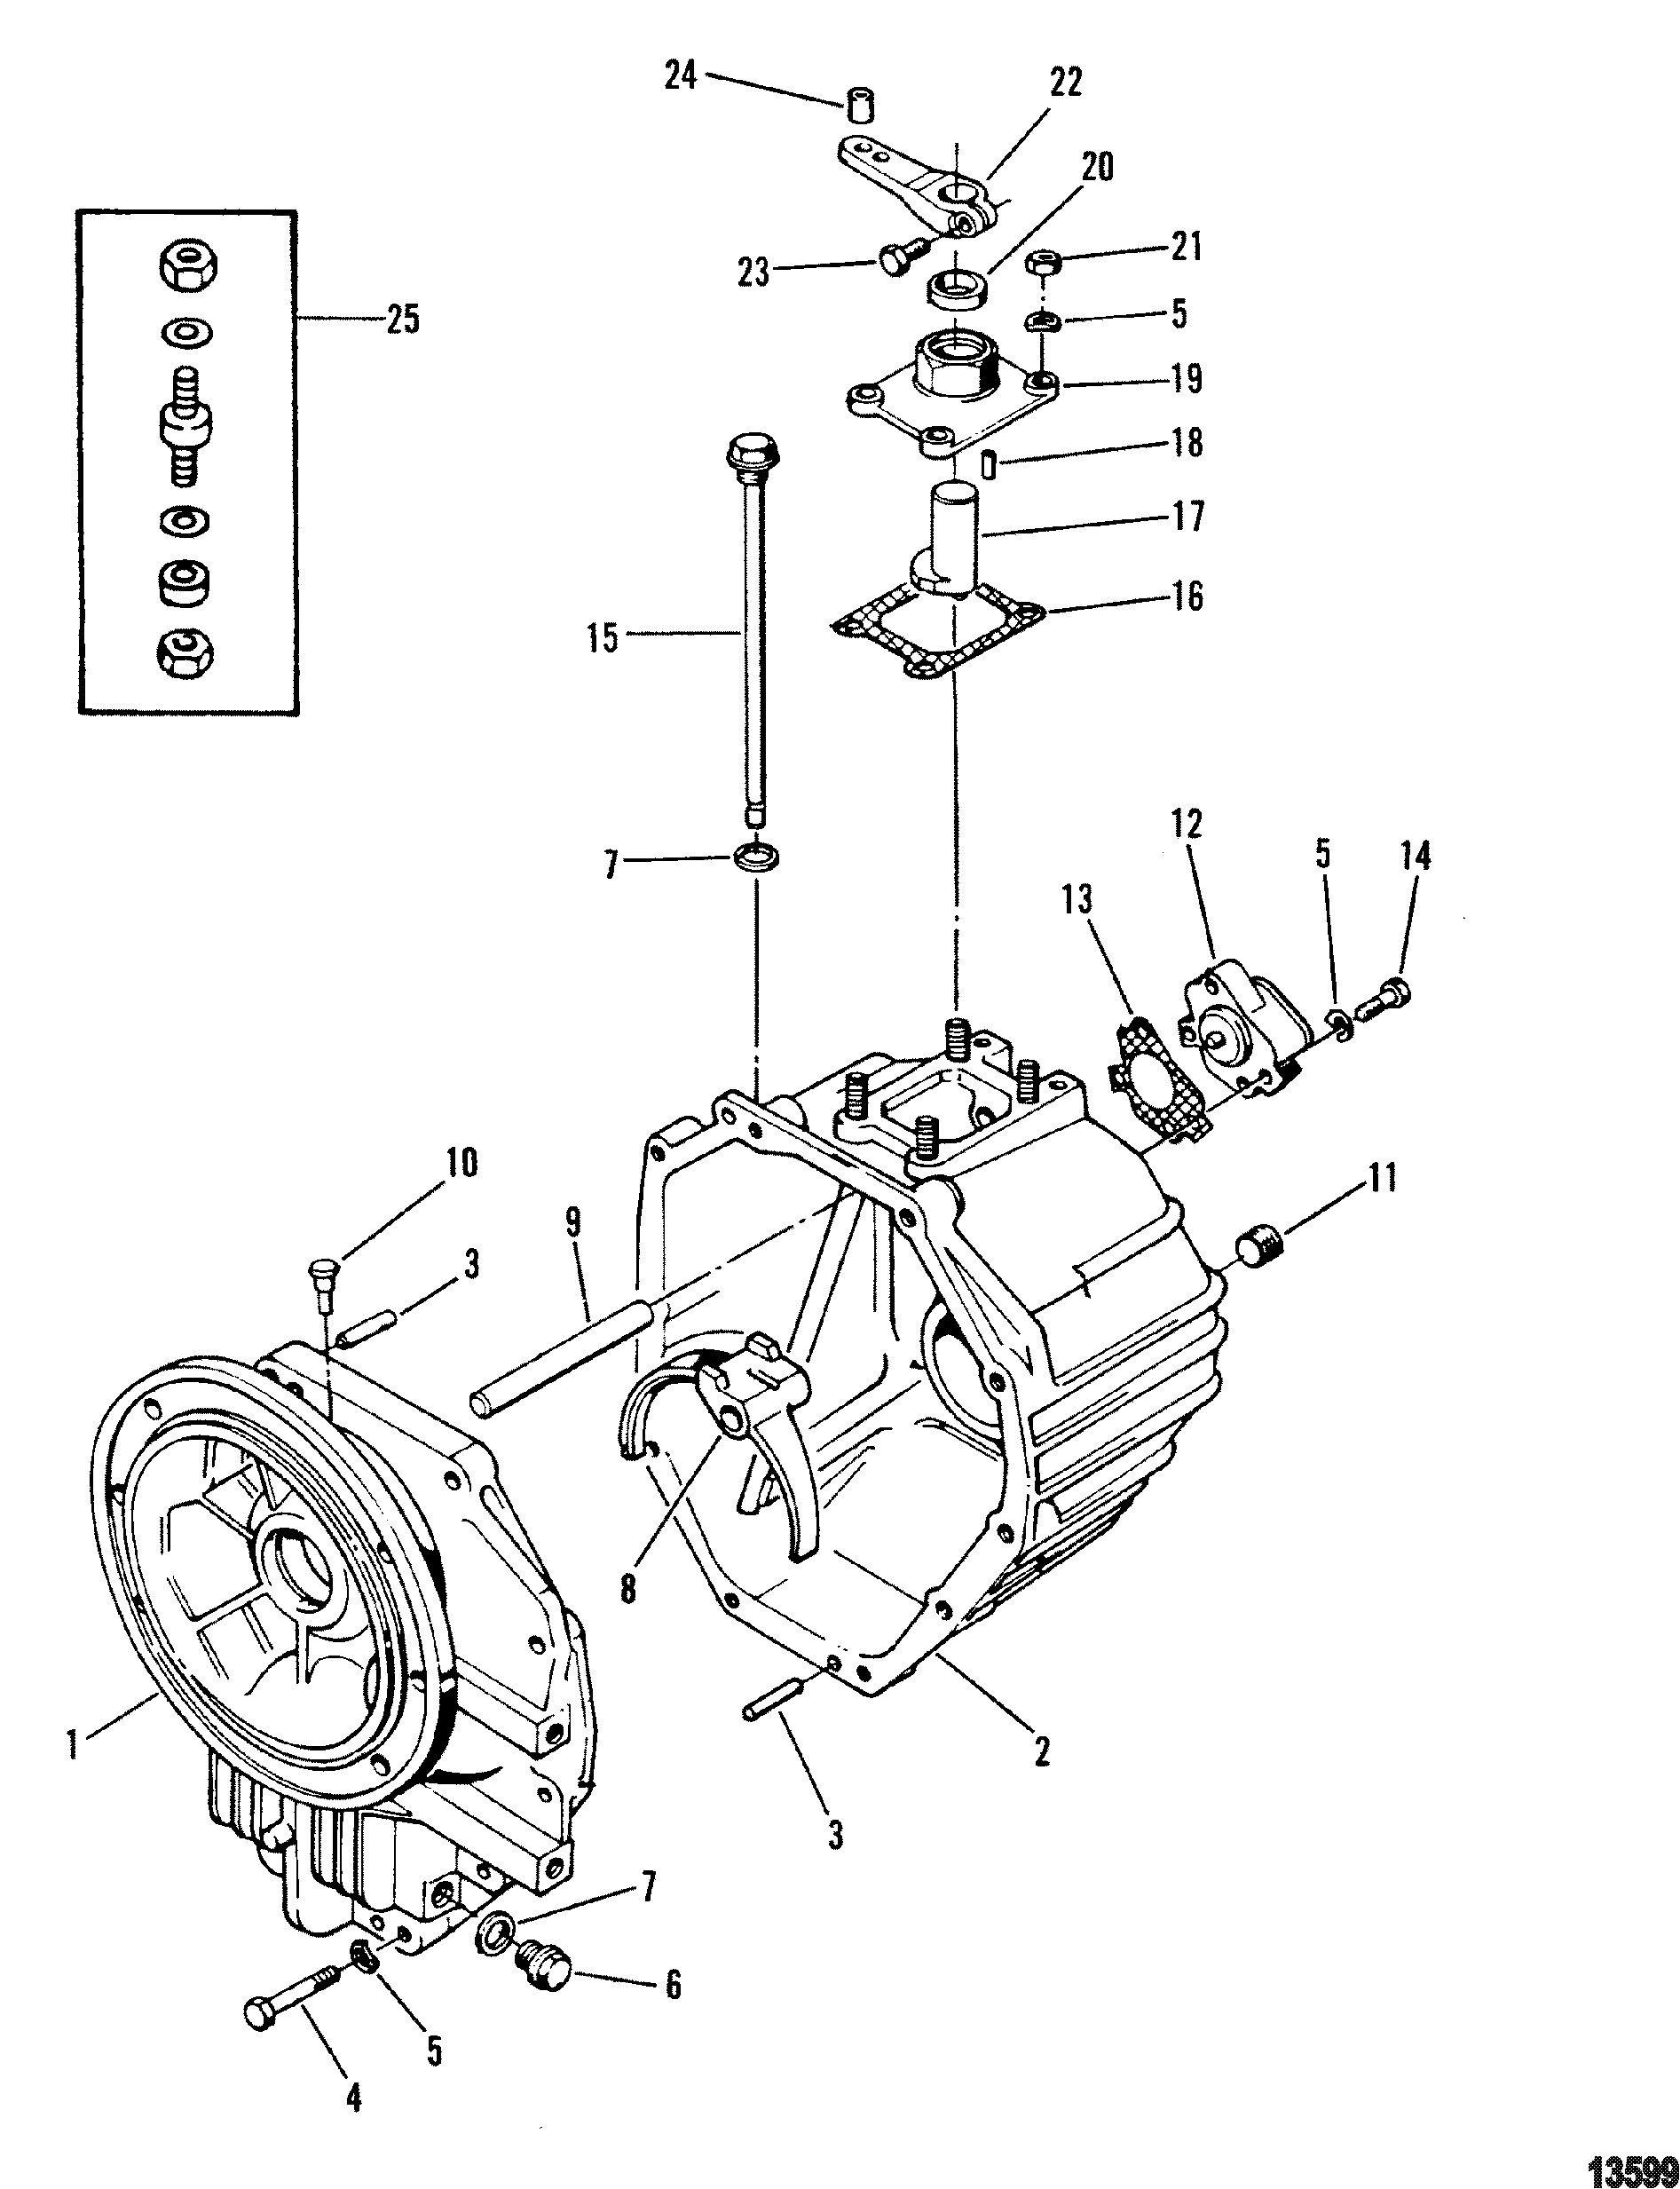 Transmission(8 Degree Down) (Outer Housing)